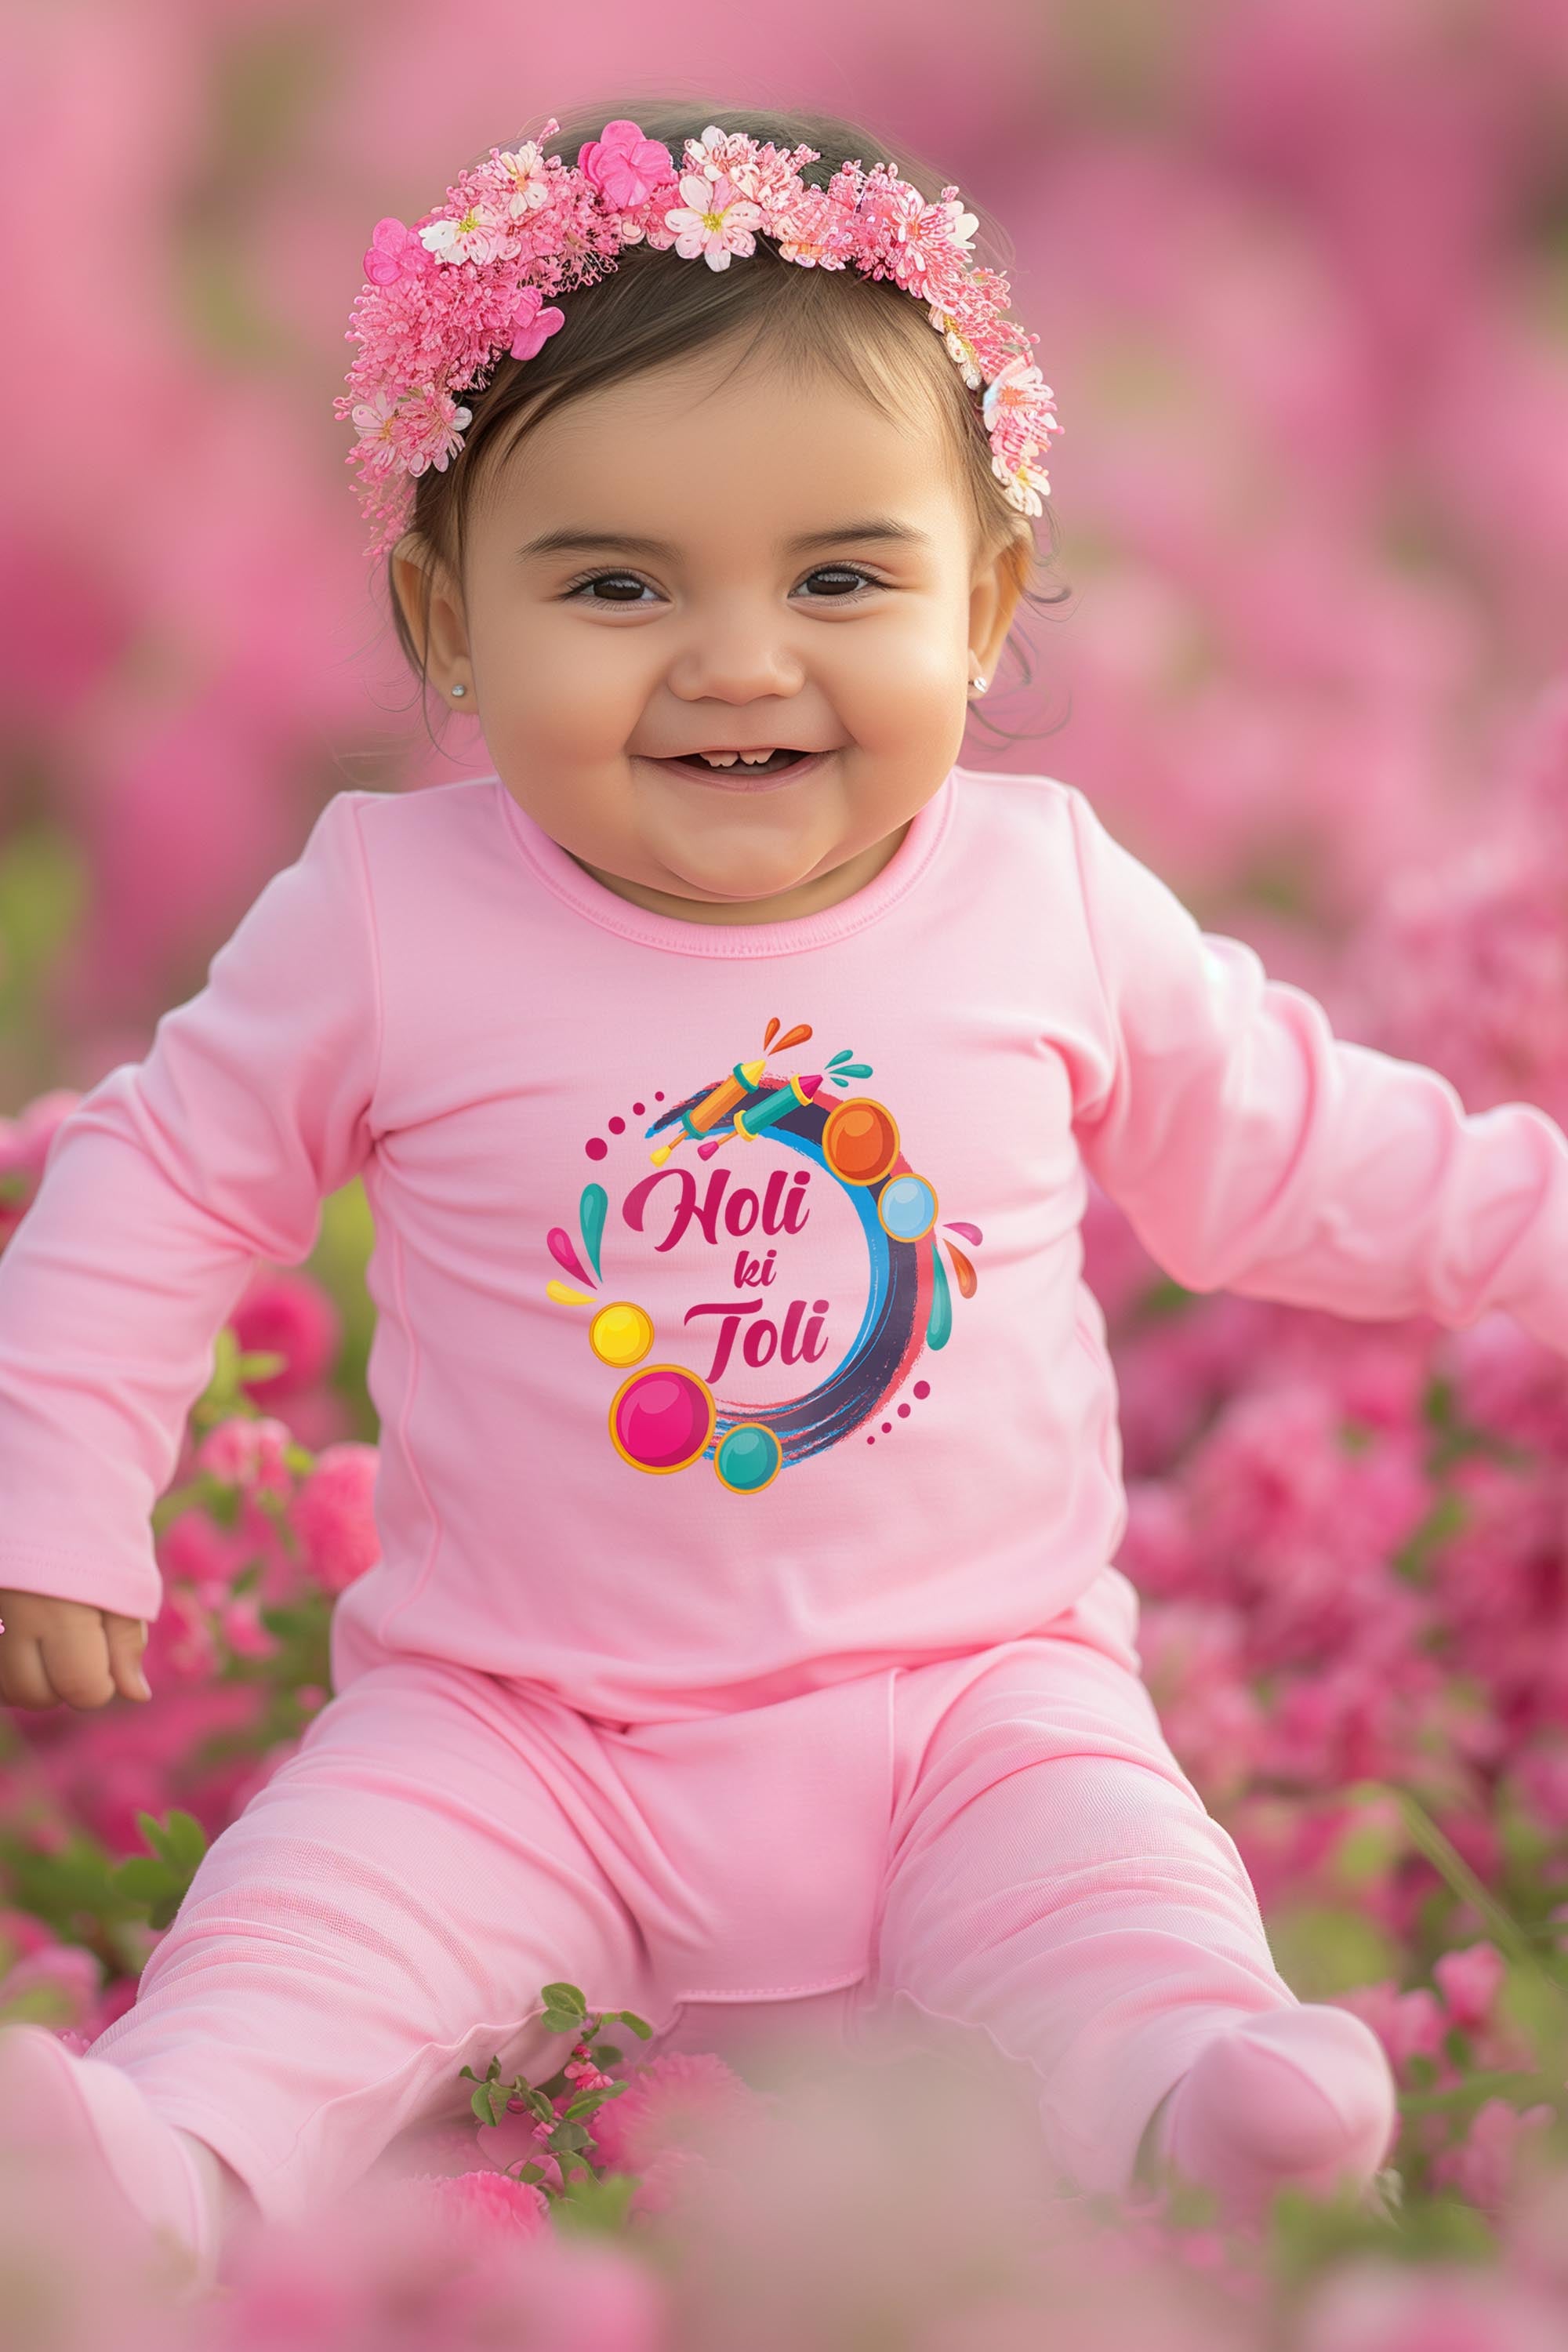 Celebrate Holi with Vibrant and Stylish Outfits for your Little Ones